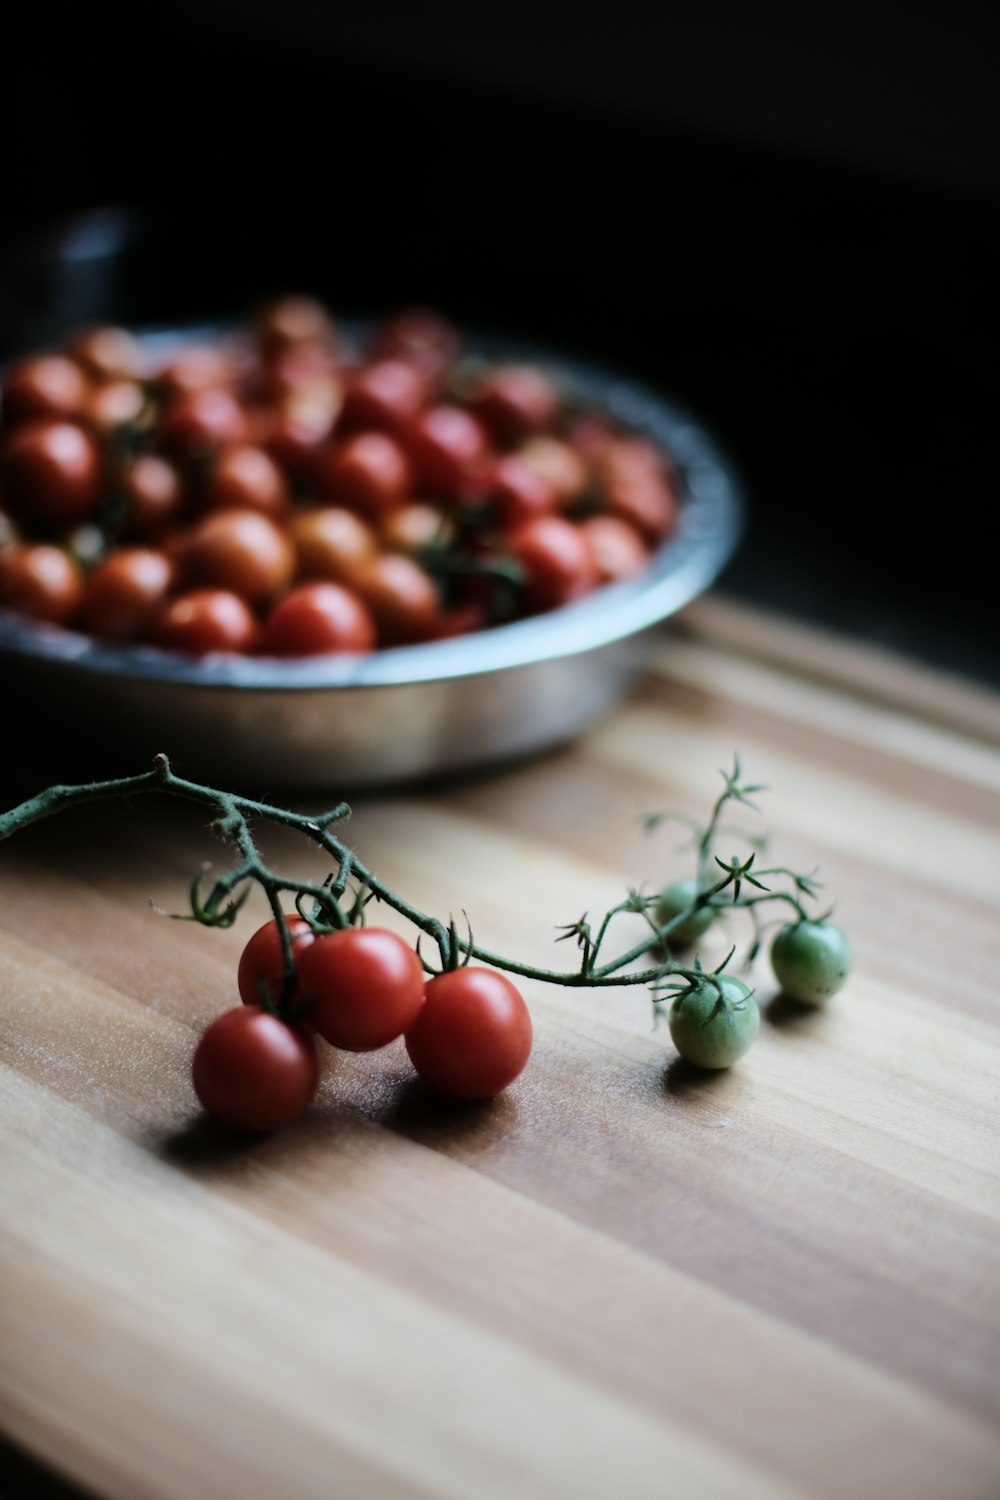 a close up of a bowl of tomatoes on a table